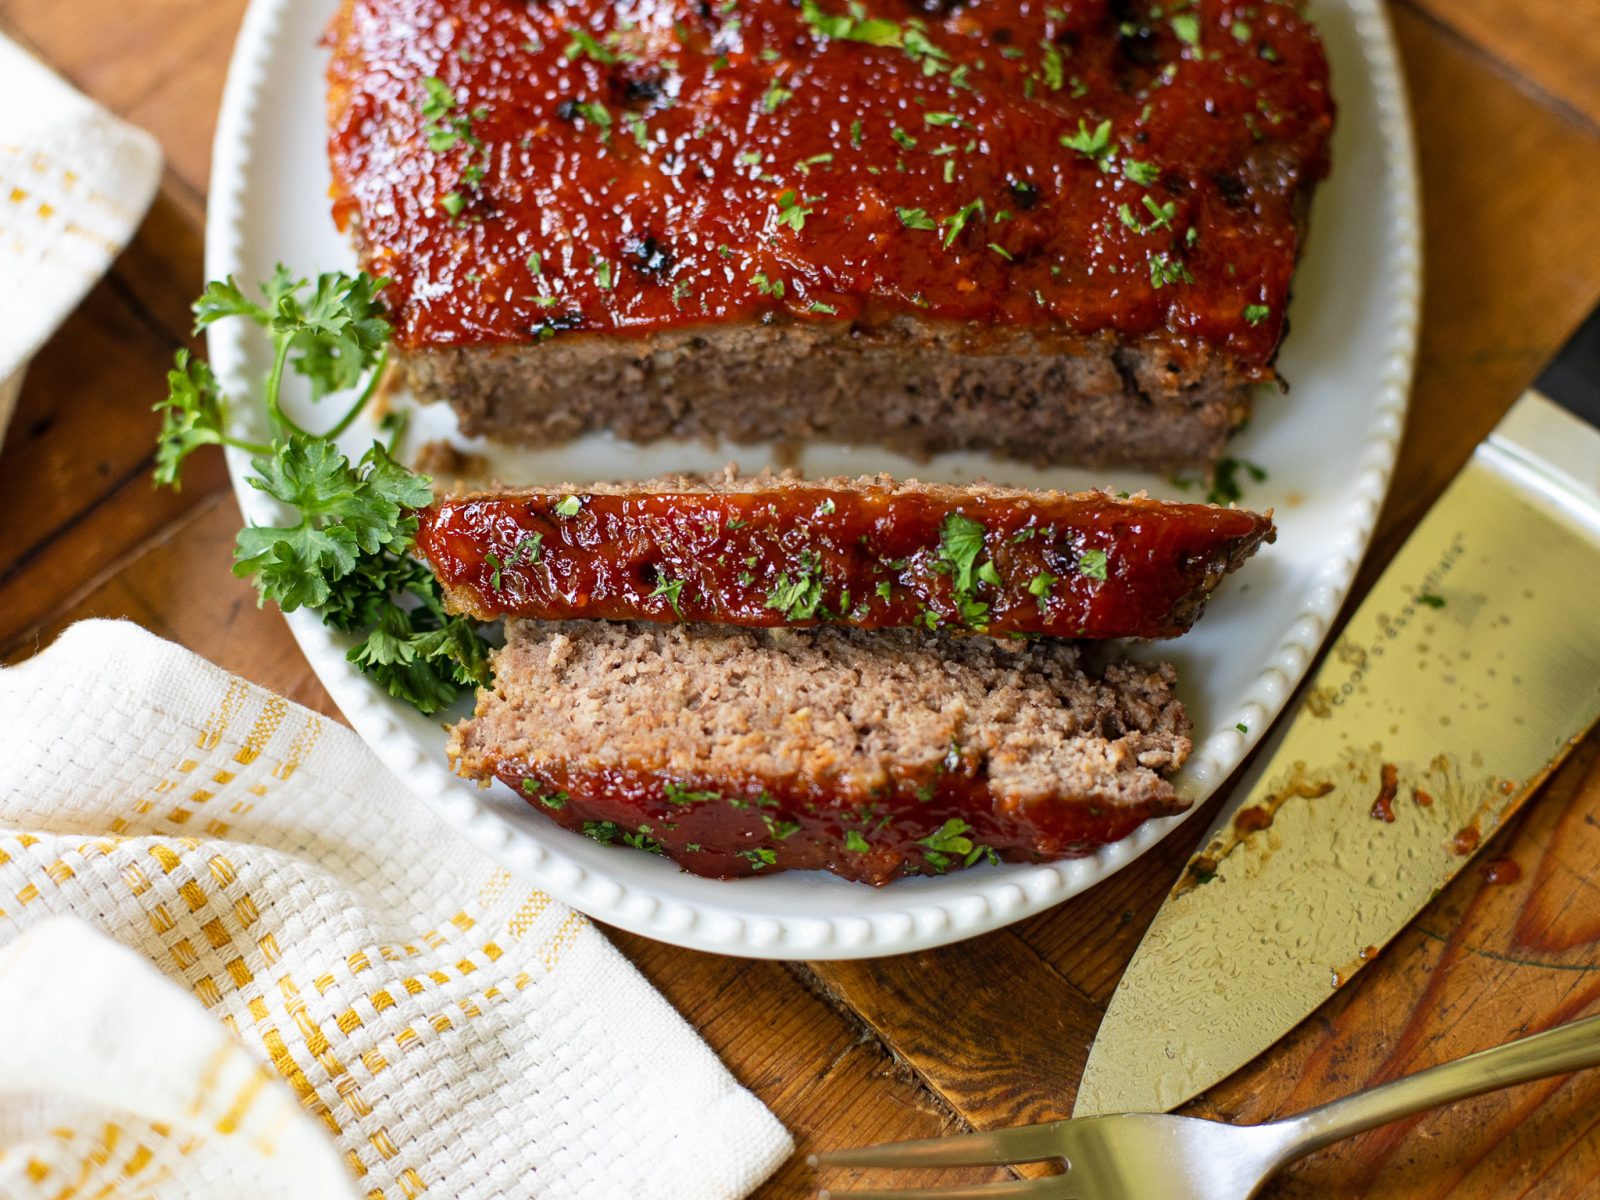 Slow Cooker Meatloaf Is The Ultimate Meal For Your Busy Weeknight!